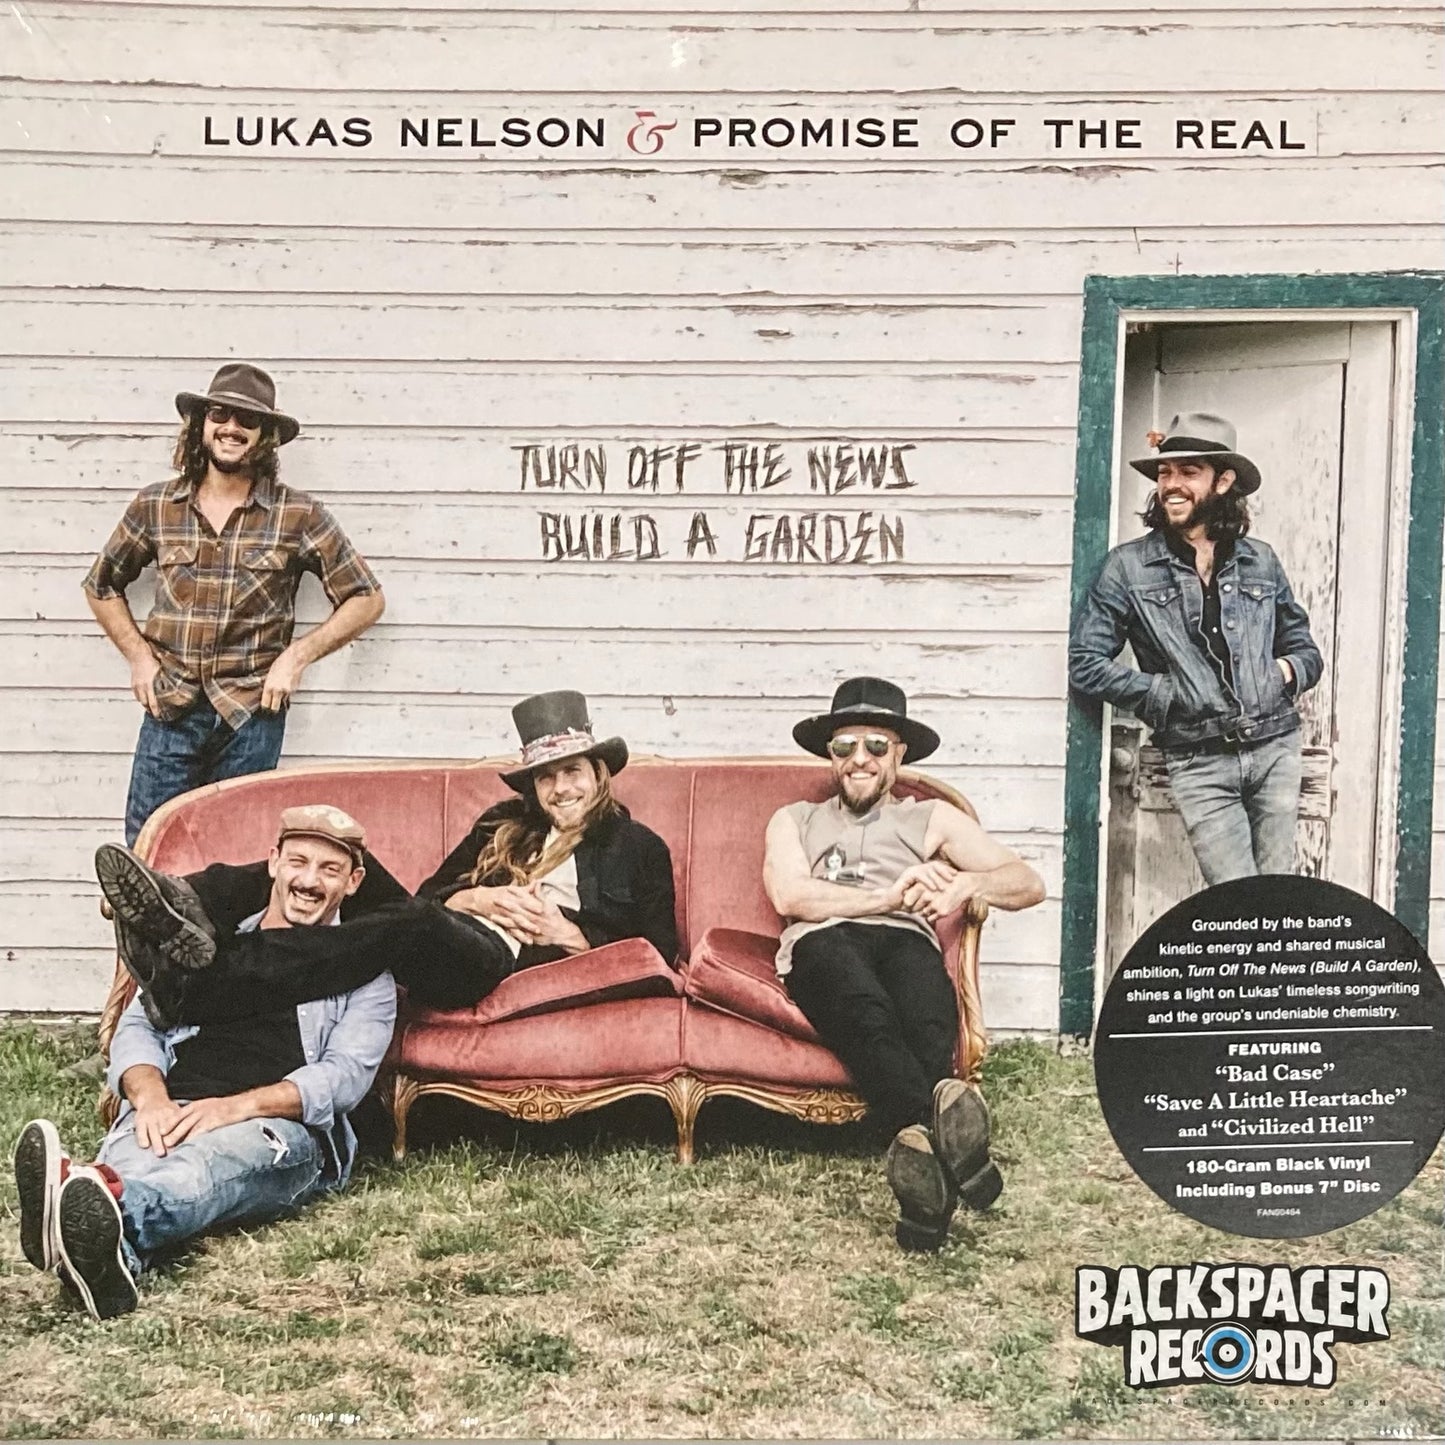 Lukas Nelson & Promise Of The Real – Turn Off The News (Build A Garden) LP + 7" (Sealed)